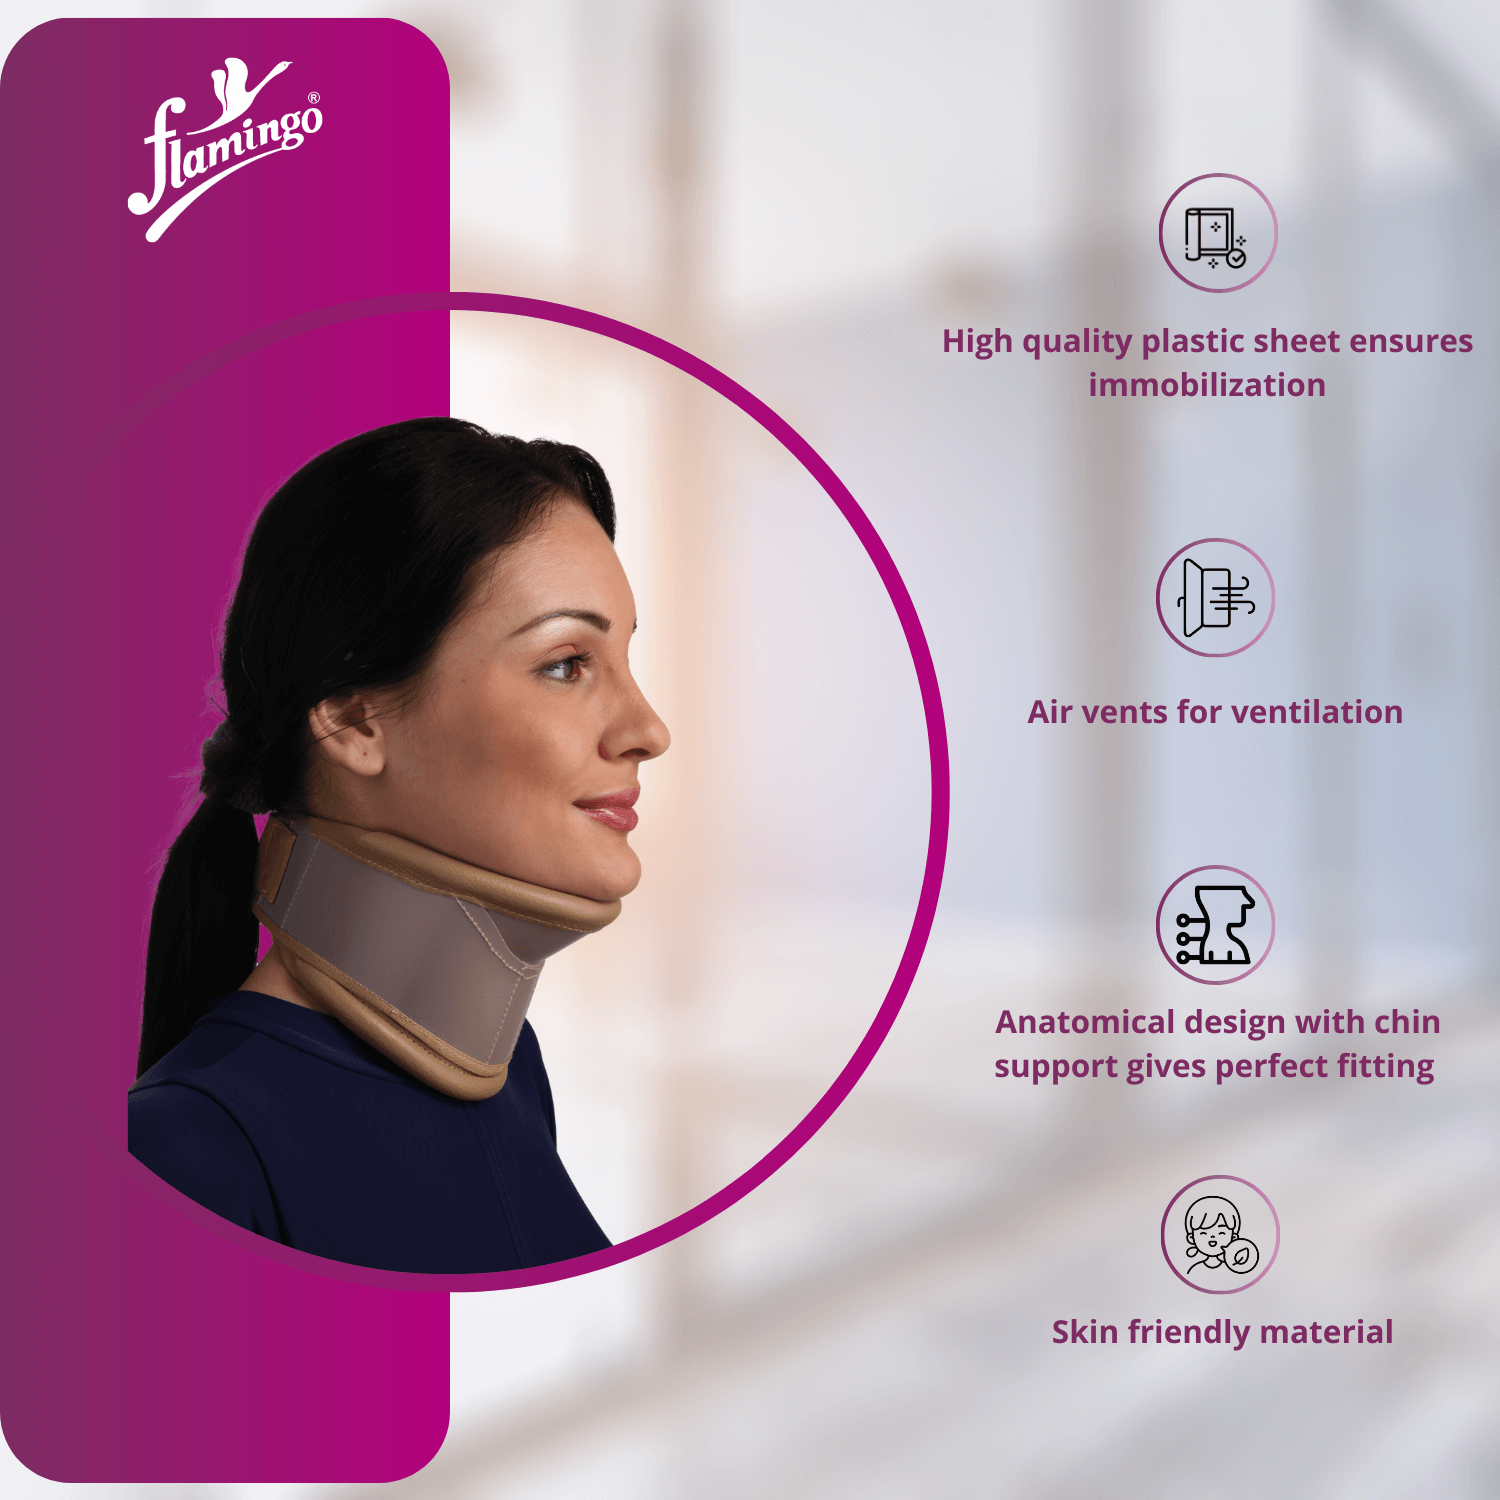 Cervical collar with neck support